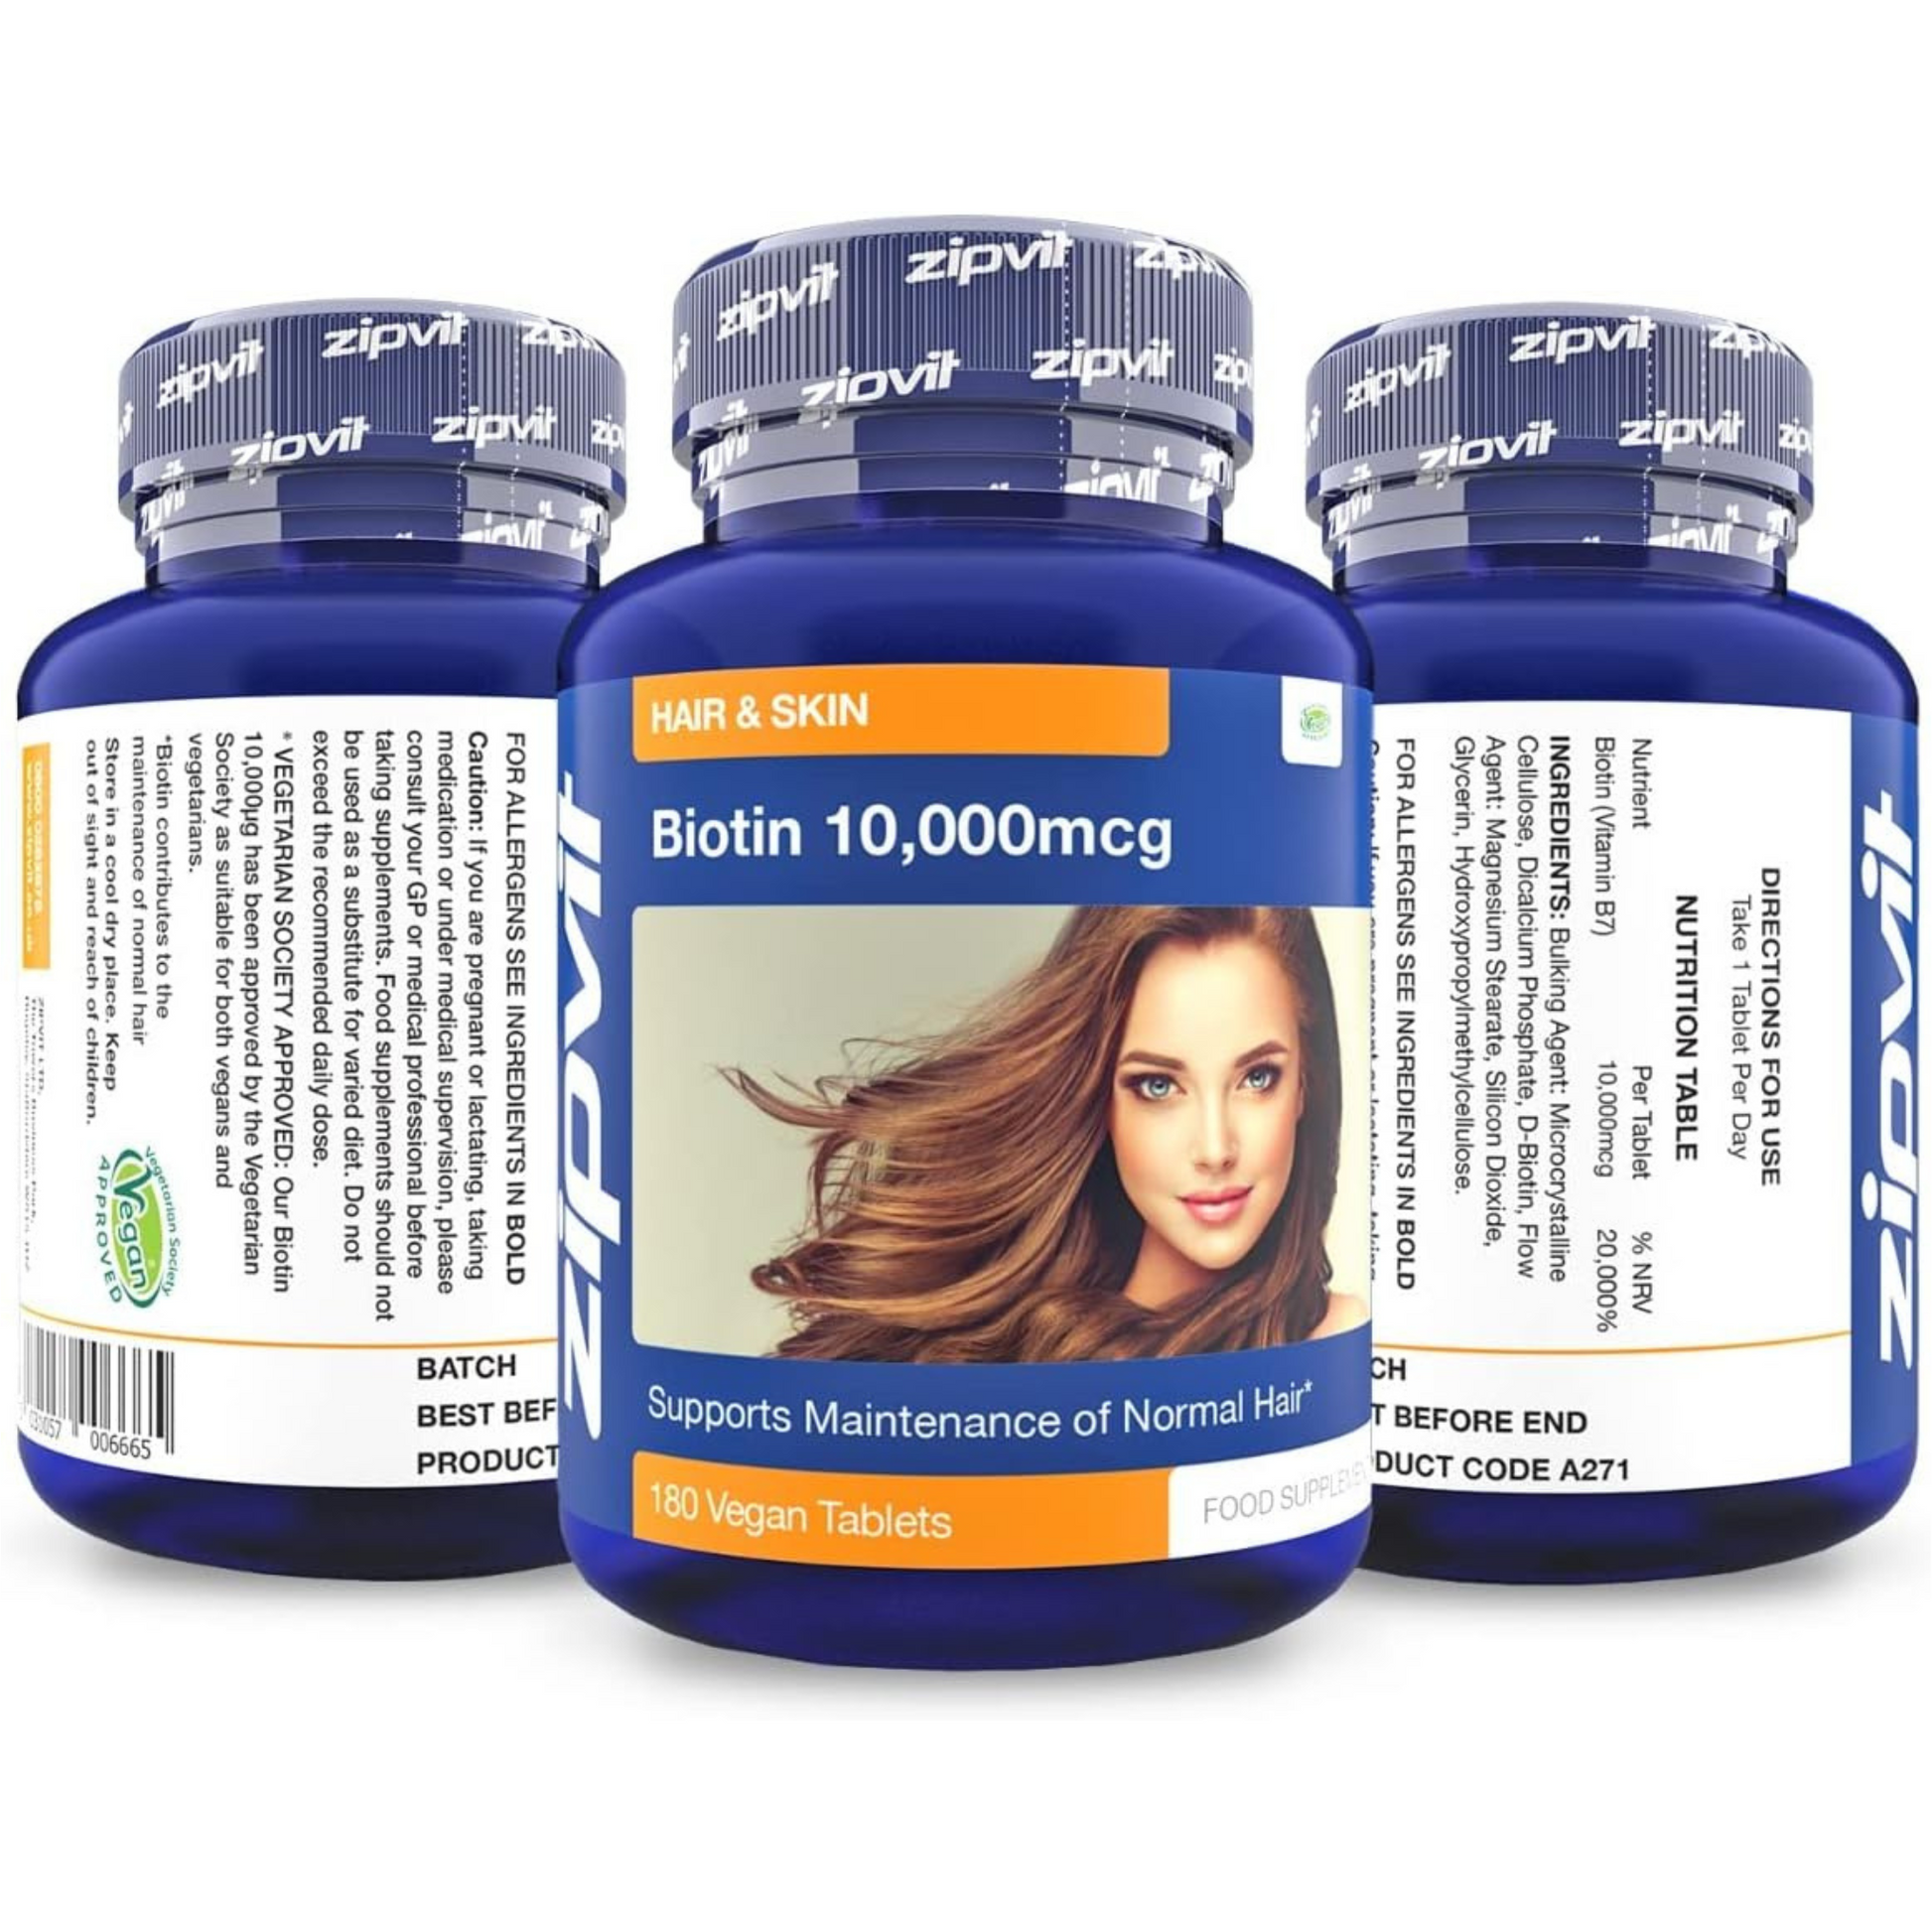 Zipvit Biotin Hair & Skin Supplement is a double strength Biotin which contributes to the maintenance of normal hair & skin. Best imported foreign genuine authentic real UK British premium quality health beauty skin care skincare dietary anti ageing supplement cheap price in Dhaka Chittagong Sylhet Bangladesh.